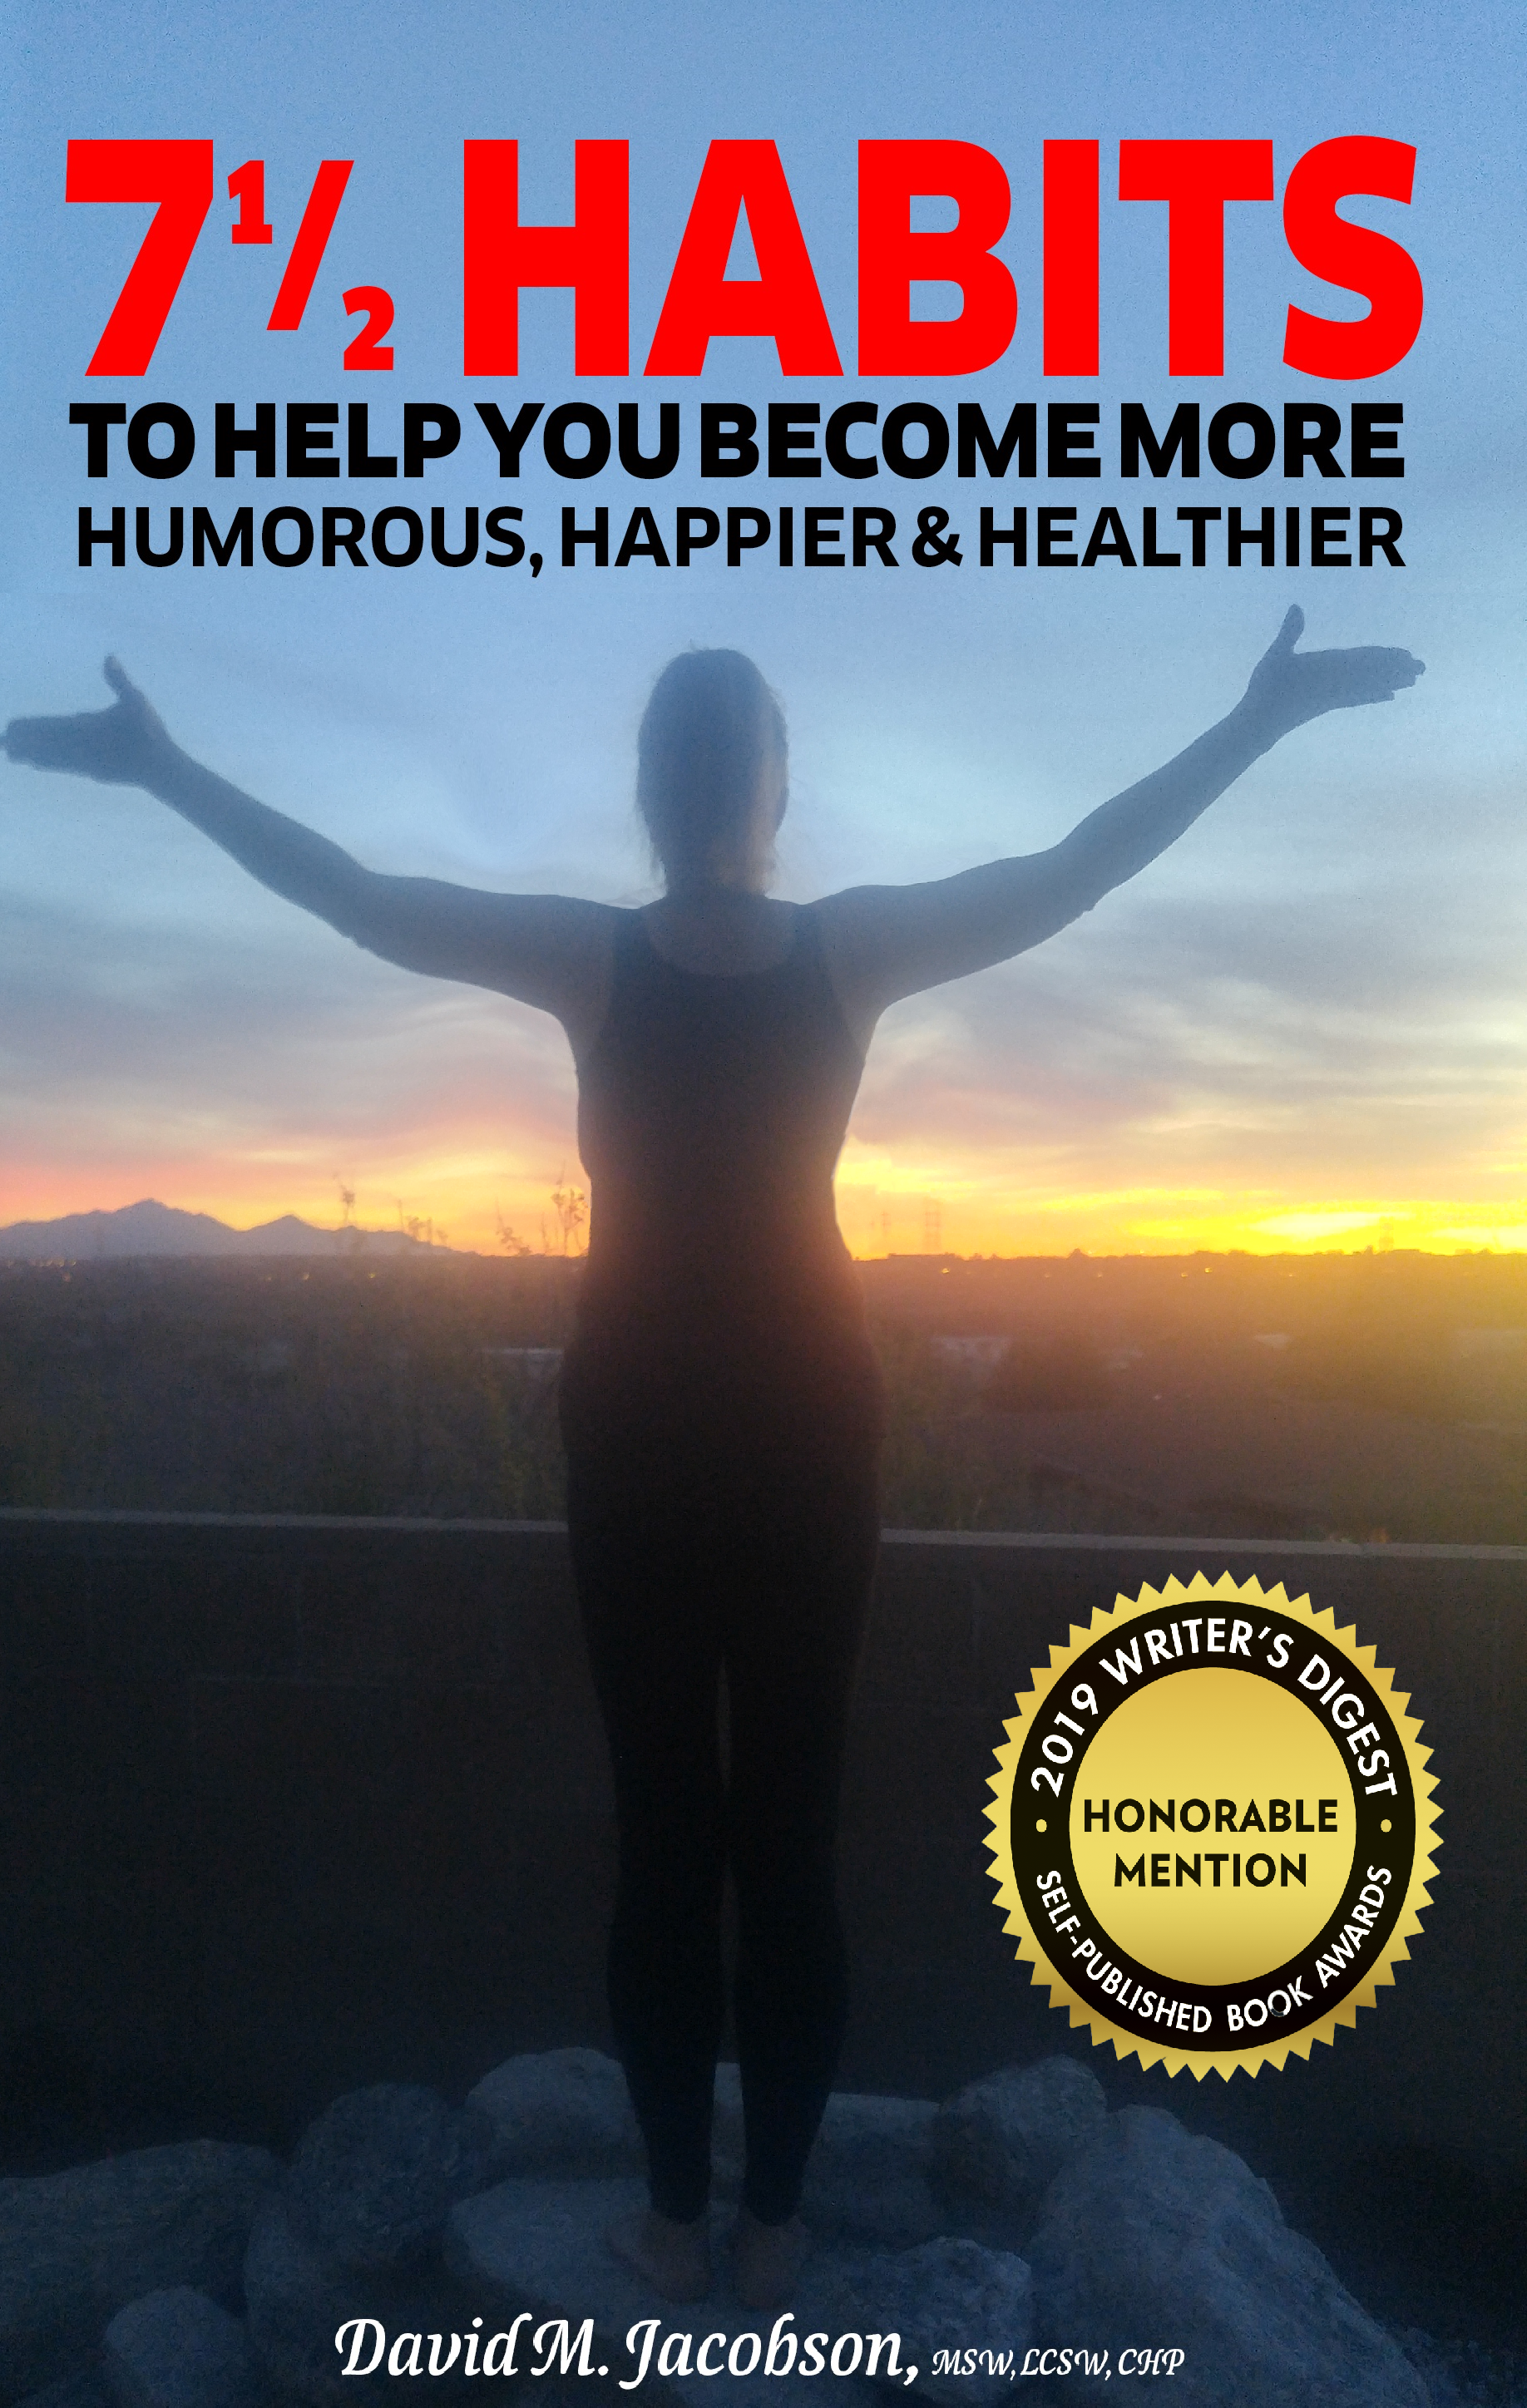 FREE: 7 1/2 Habits To Help You Become More Humorous, Happier & Healthier by David Jacobson